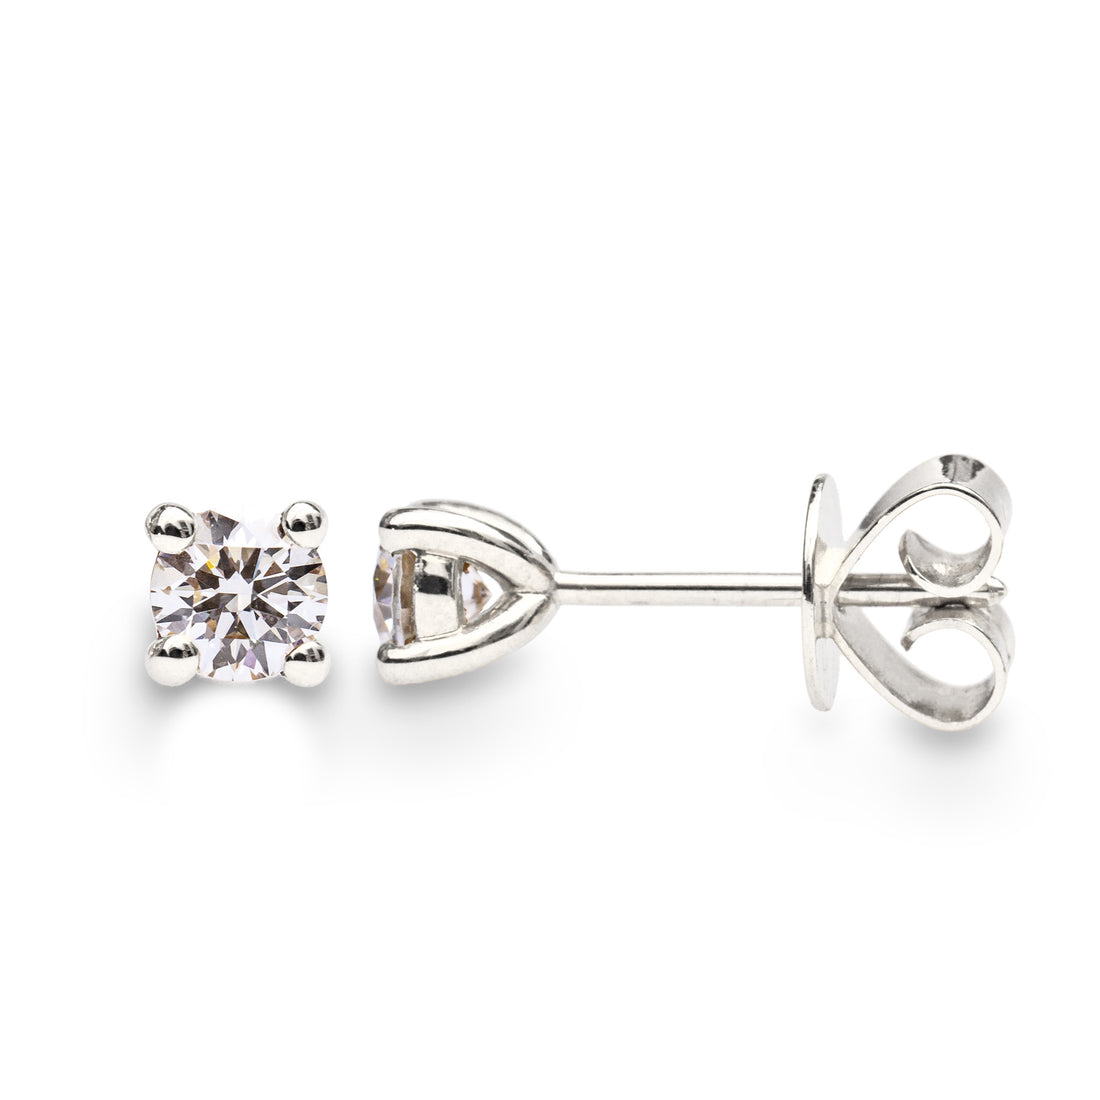 round brilliant cut diamond stud earring with solid gold four claw basket setting and heavy backs